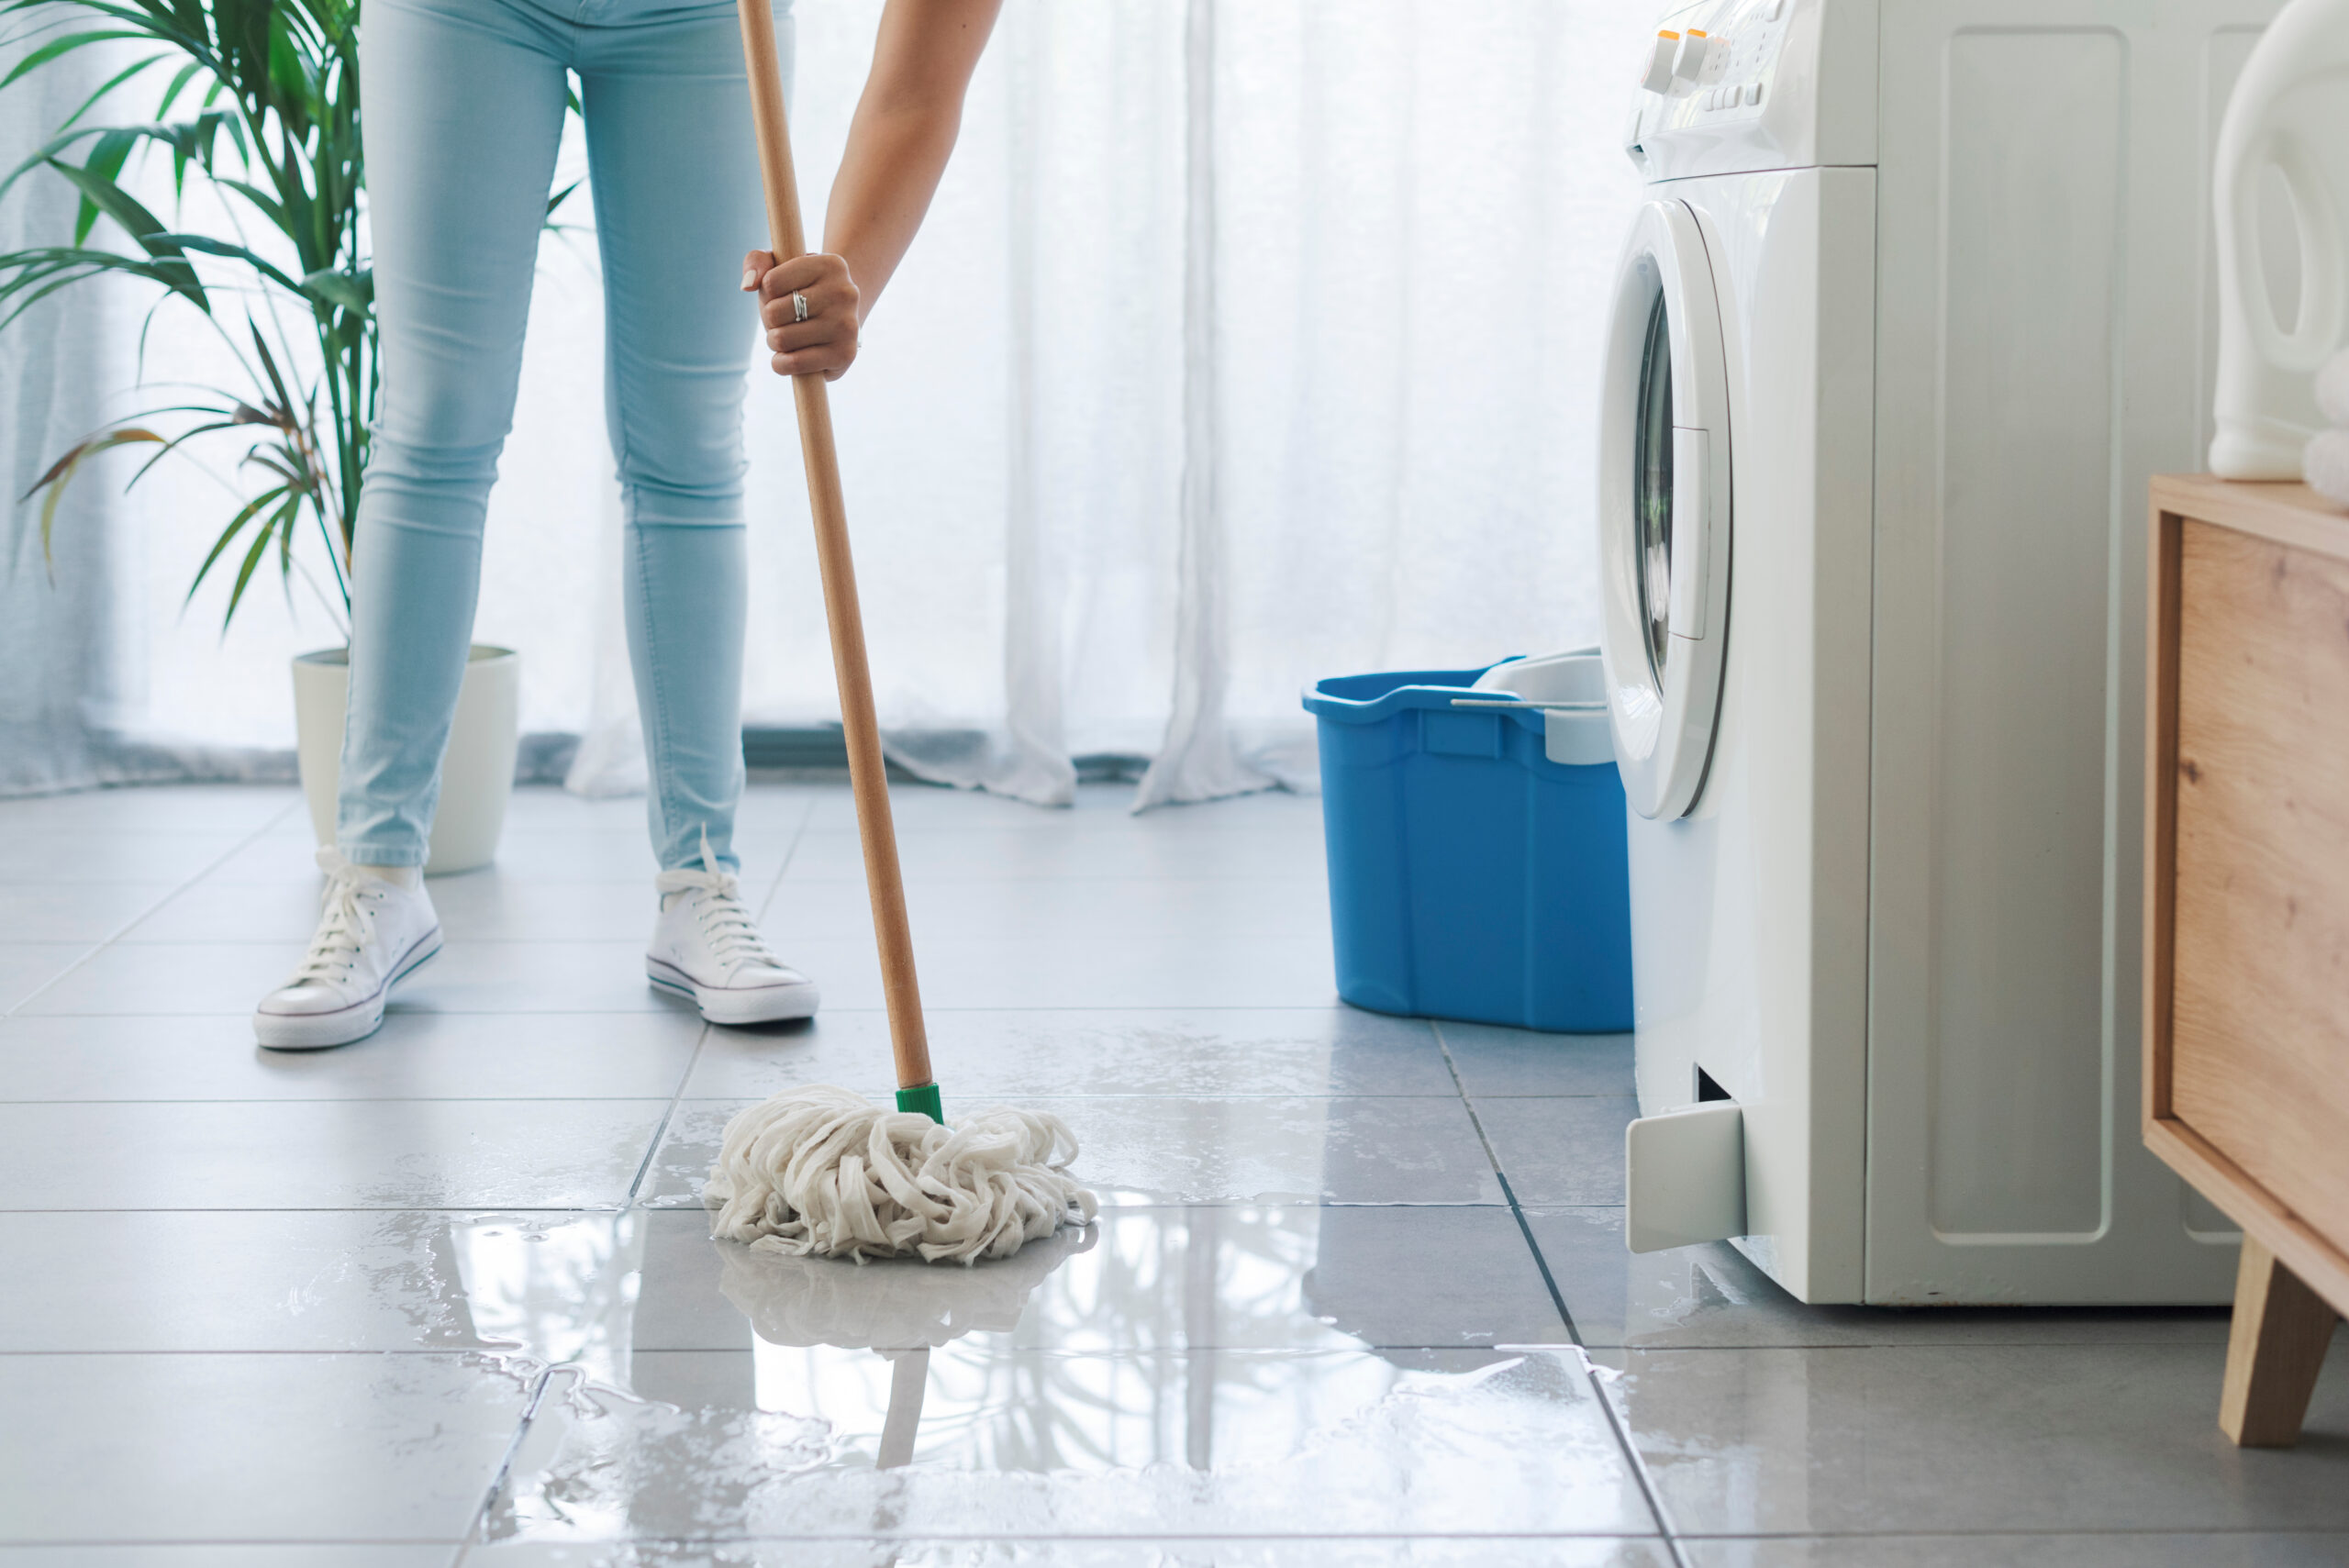 How To Prevent Water Damage from Leaking Appliances